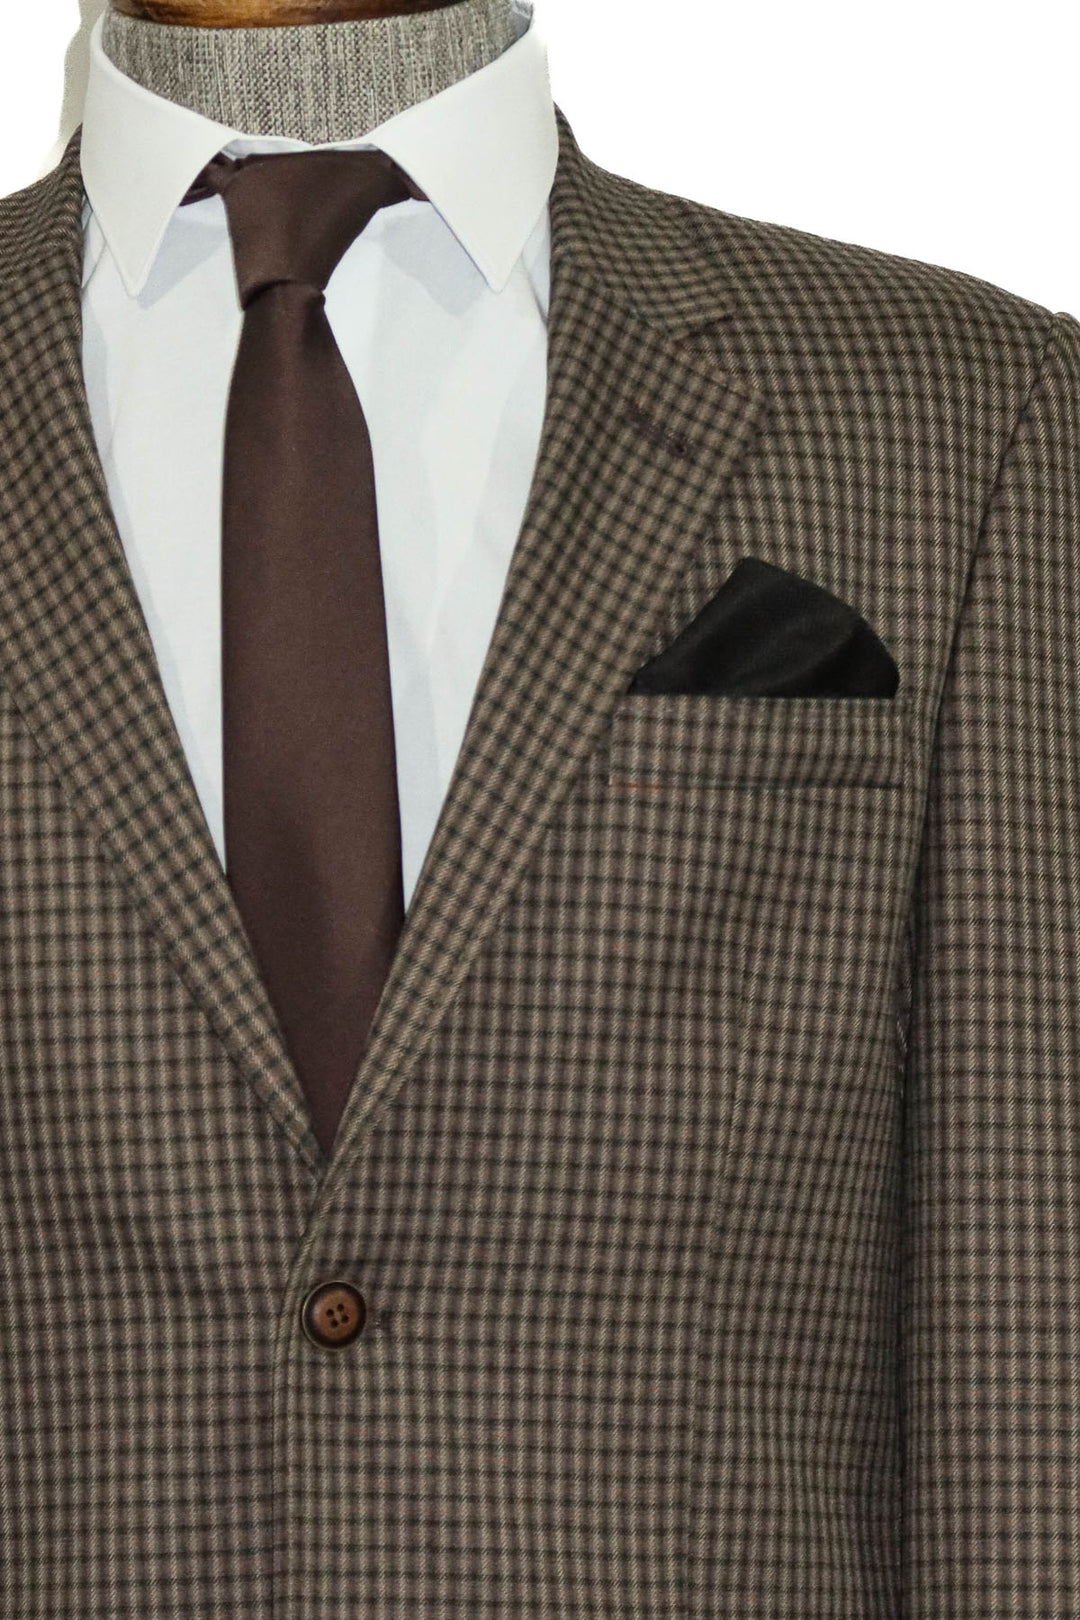 4 Drop Checkered Brown Jacket-Wessi